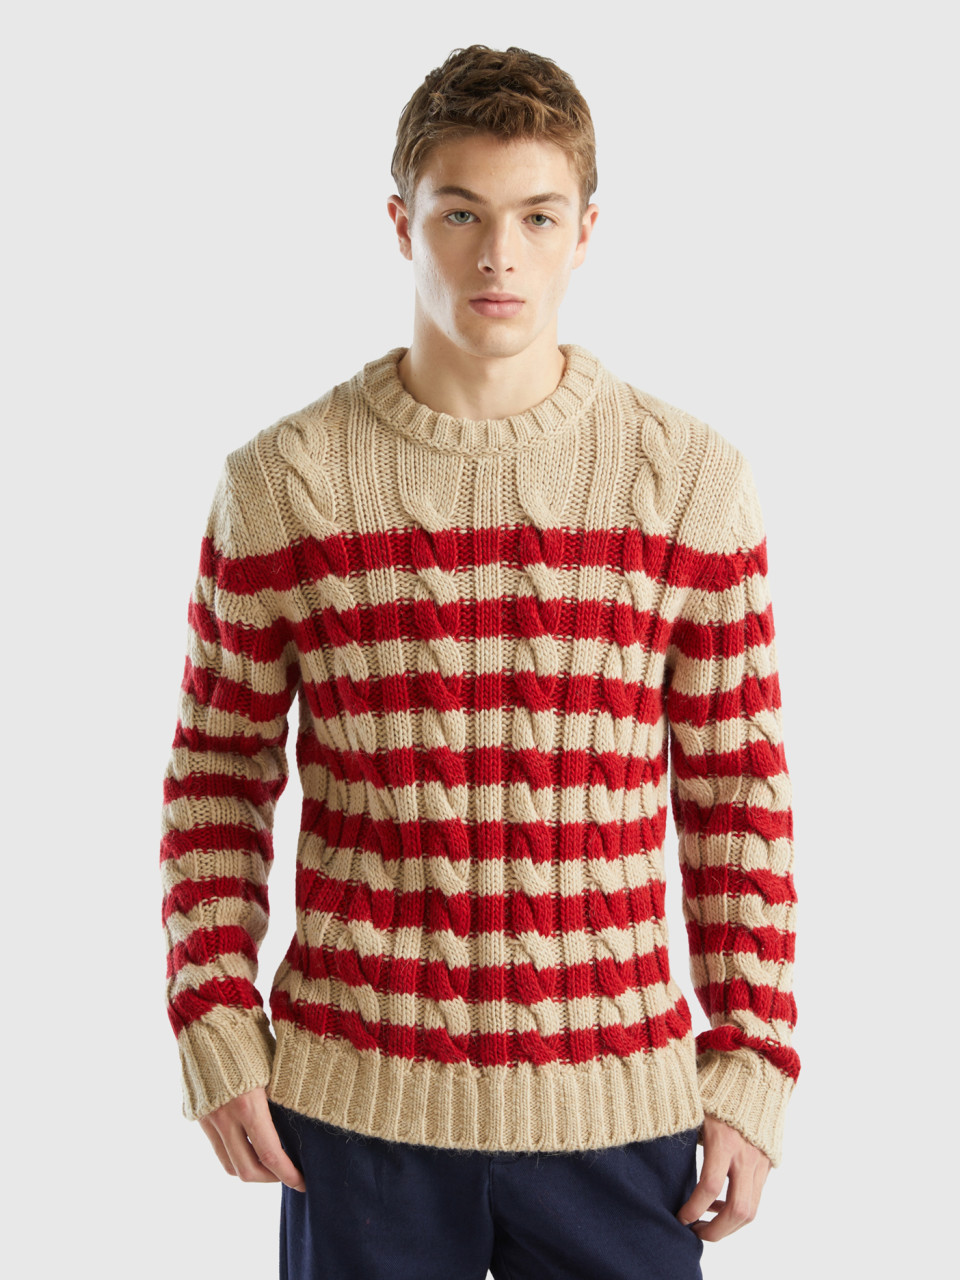 Benetton, Striped Sweater In Alpaca And Wool Blend, Red, Men